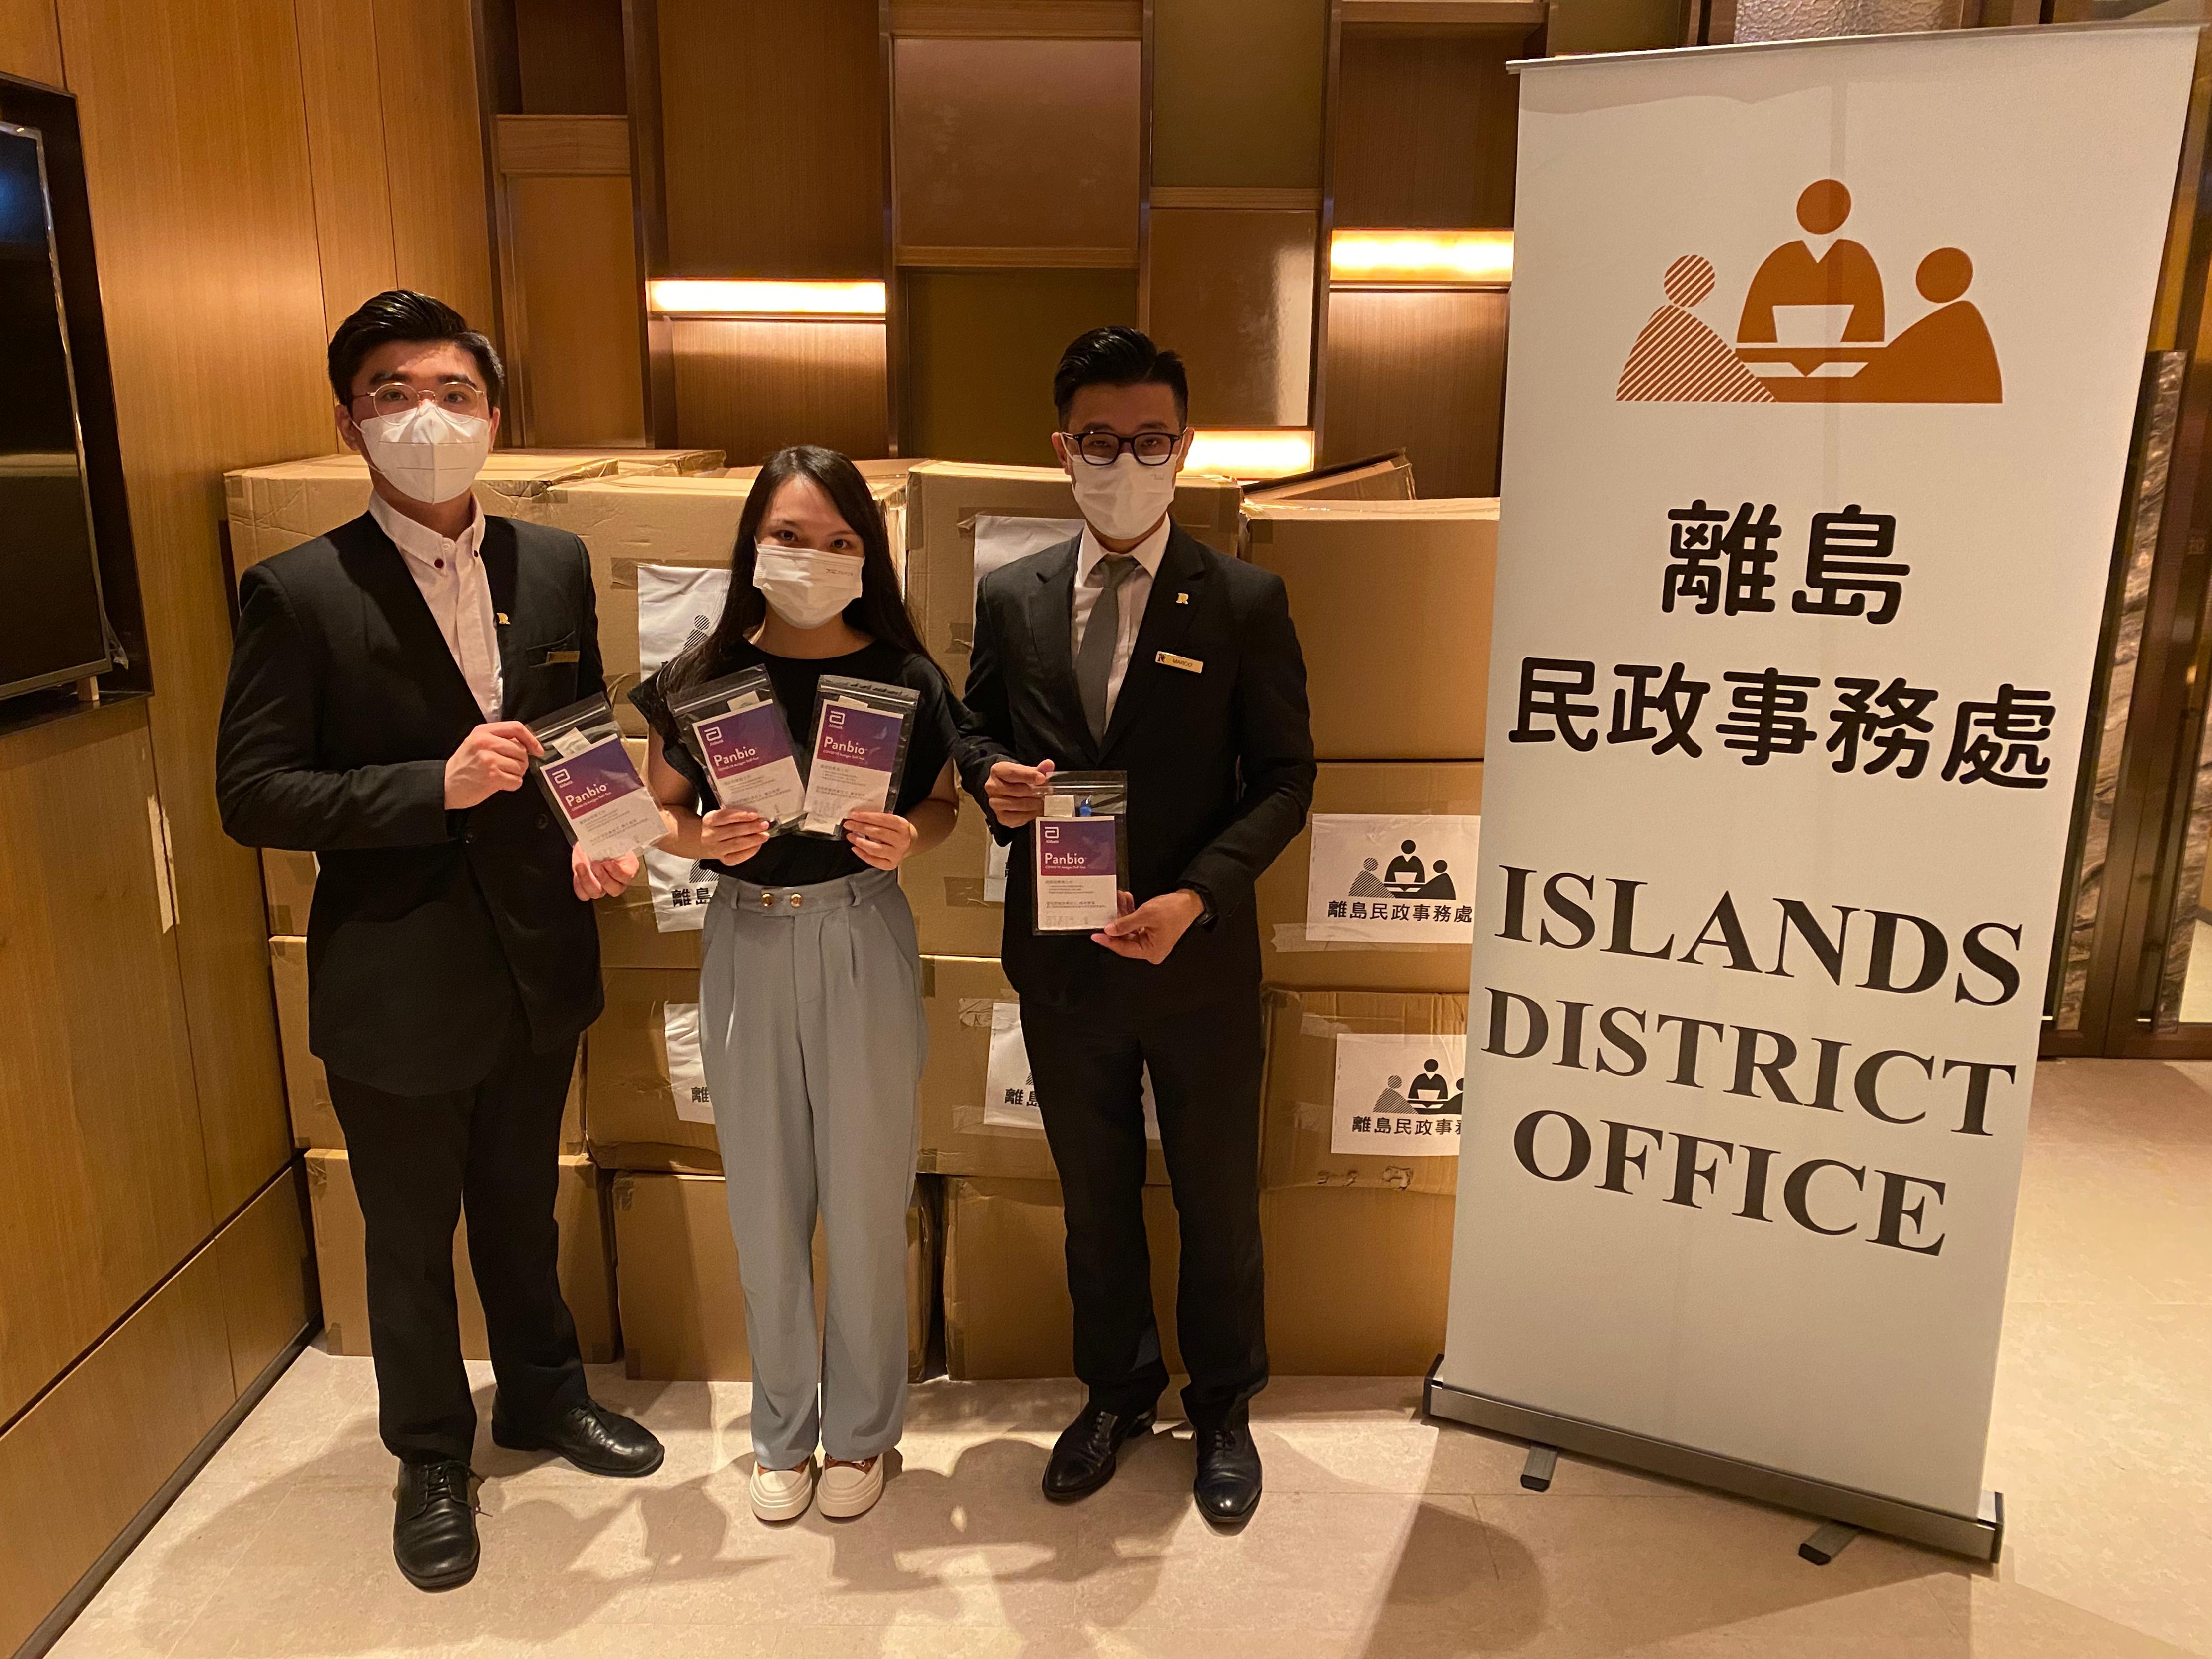 The Islands District Office today (May 26) distributed COVID-19 rapid test kits to households, cleansing workers and property management staff living and working in Century Link for voluntary testing through the property management company.